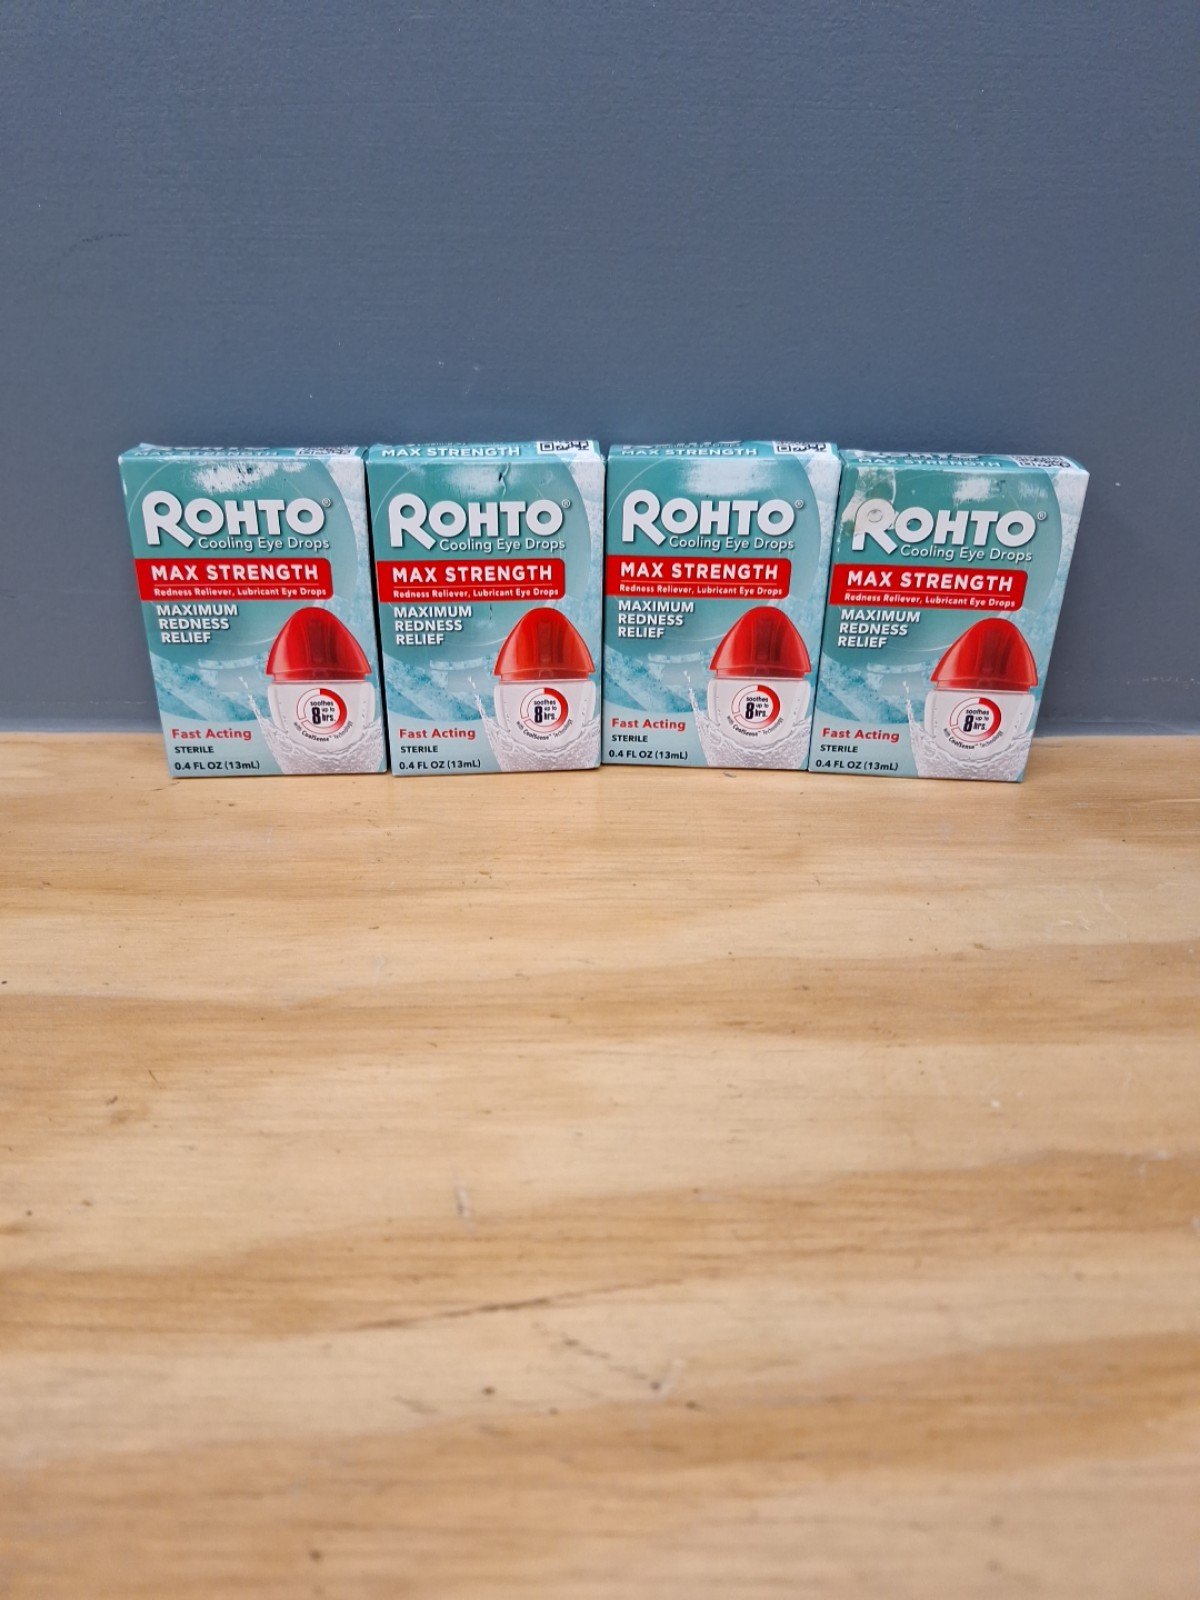 4 Boxes Rohto Max Strength Redness Relief Eye Drops  4 TOTAL BOTTLES 02/25+ AWvp7u9lp